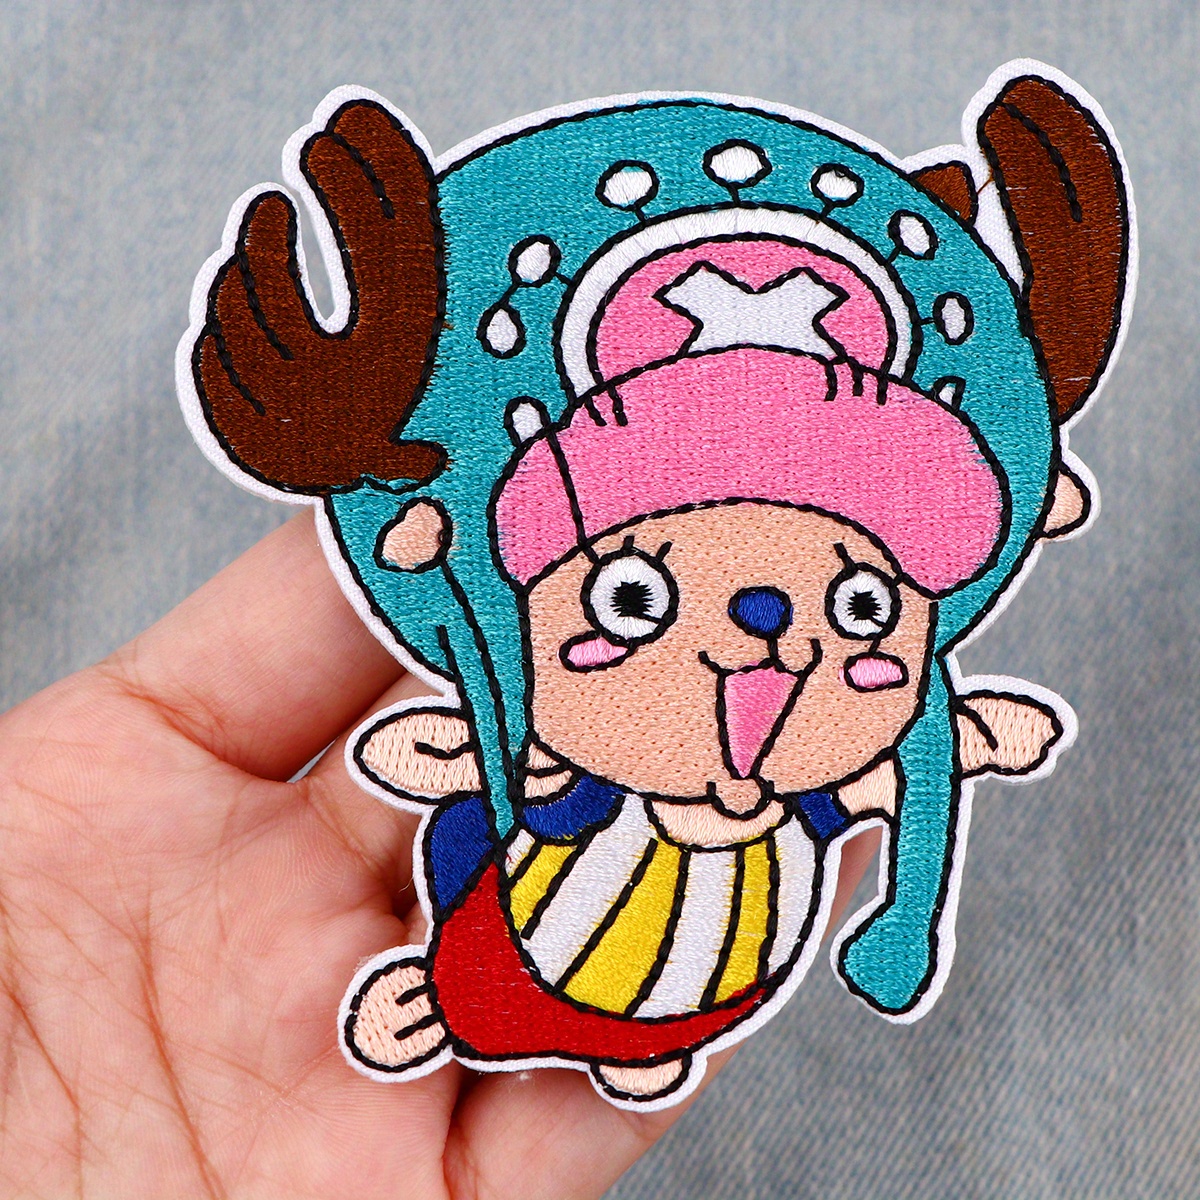 Iron On Patches For Clothing, Super Cute Cartoon Anime Embroidered Sew On  Patches For Jackets, Shirts, Backpacks